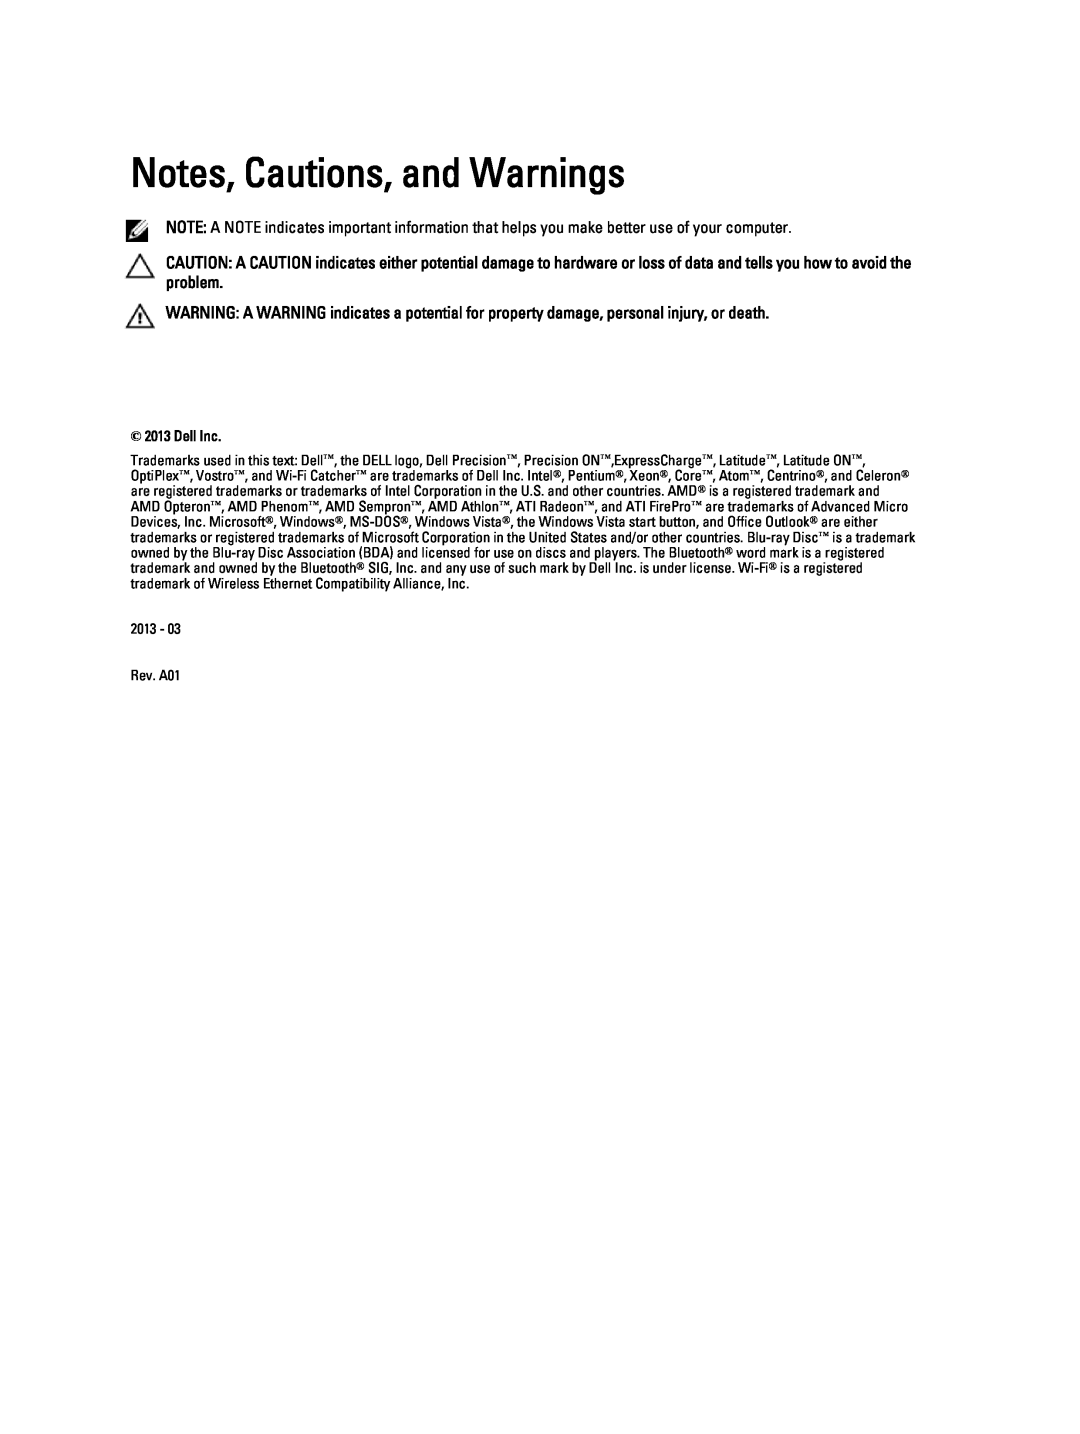 Dell 10-ST2E manual Notes, Cautions, and Warnings, Dell Inc 